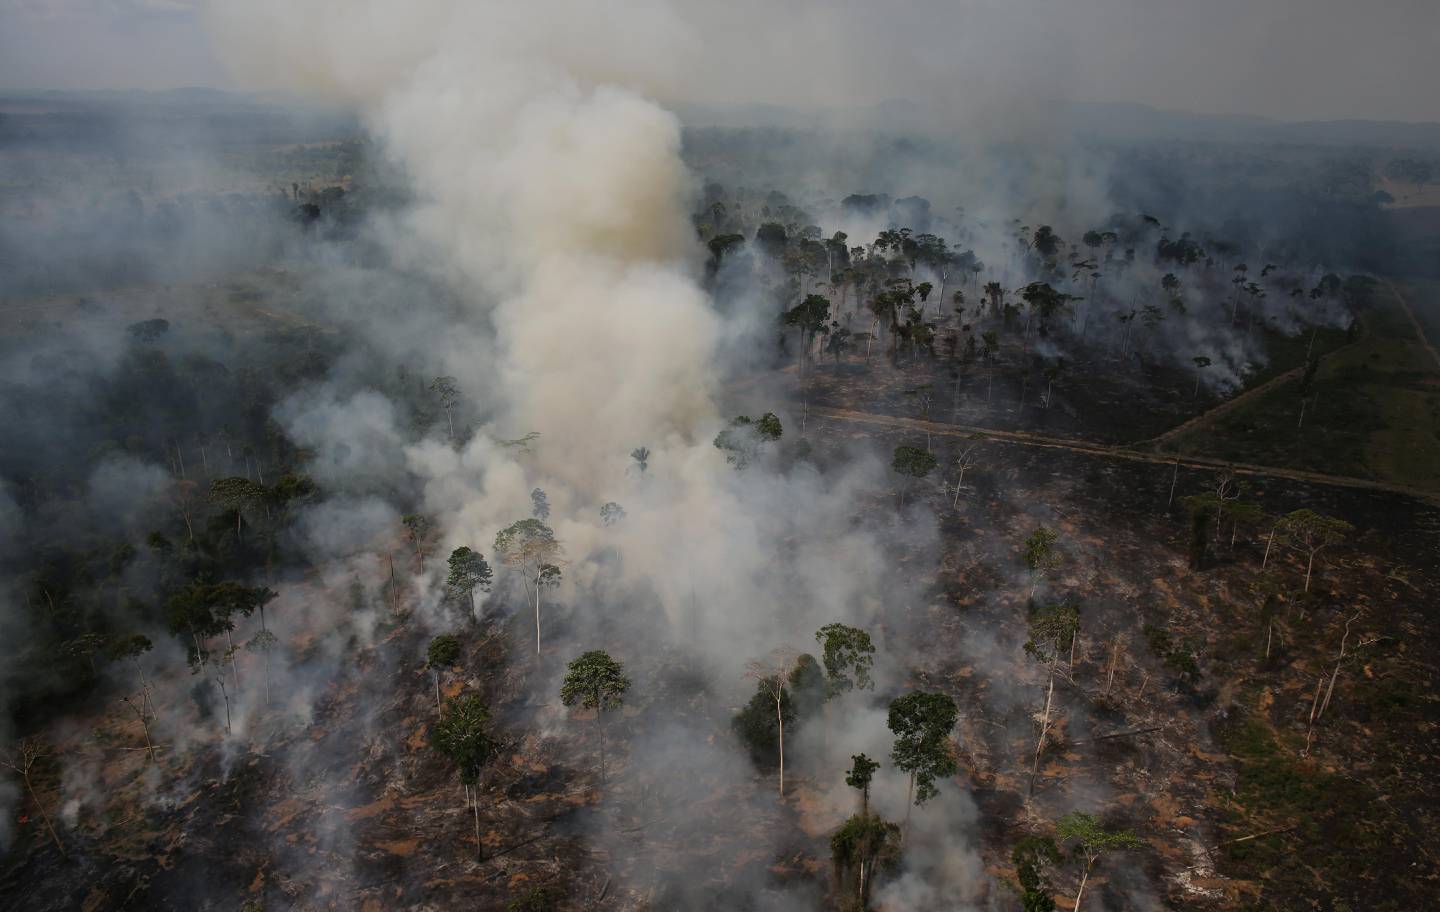 An aerial view of a tract of Amazon jungle burning as it is being cleared by loggers and farmers near the city of Novo Progresso, Para state, Brazil, September 24, 2013. Picture taken September 24, 2013. REUTERS/Nacho Doce